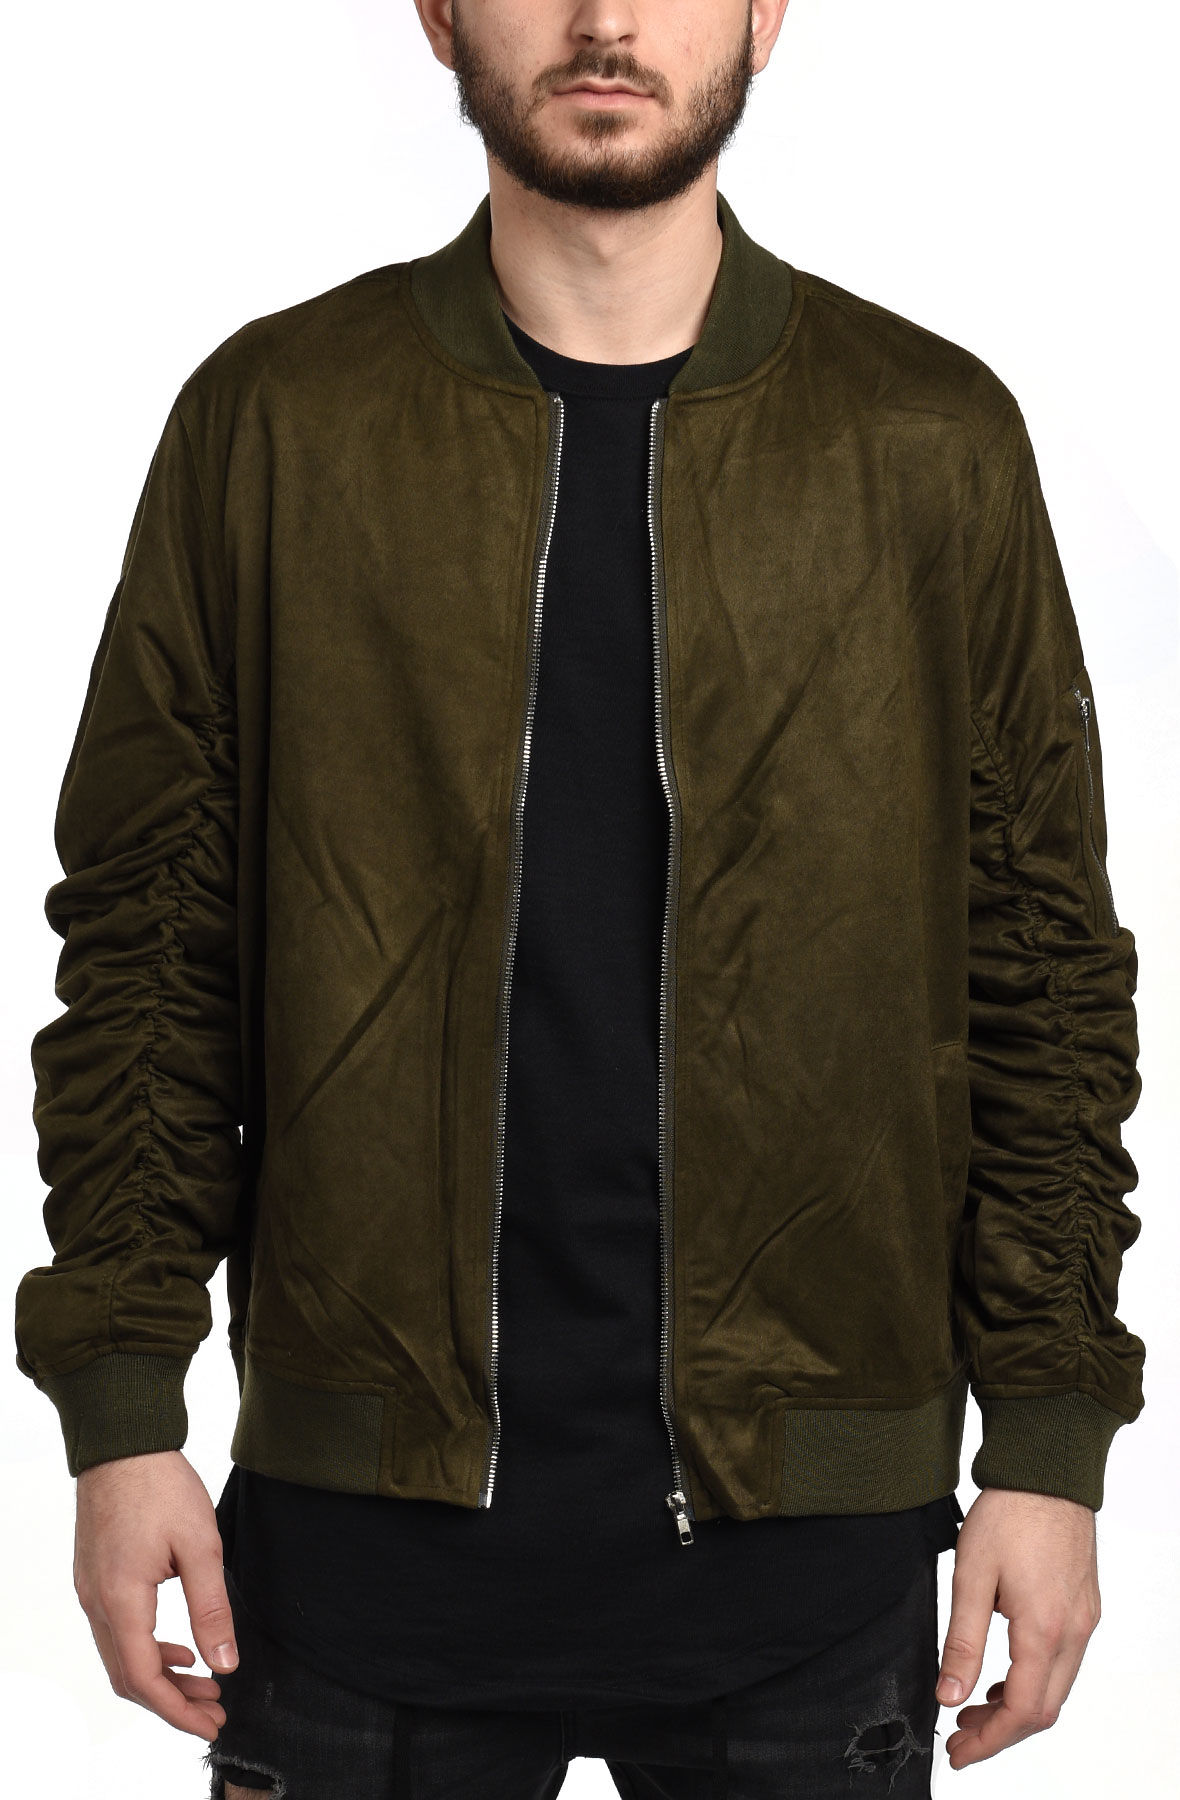 suede jacket in olive